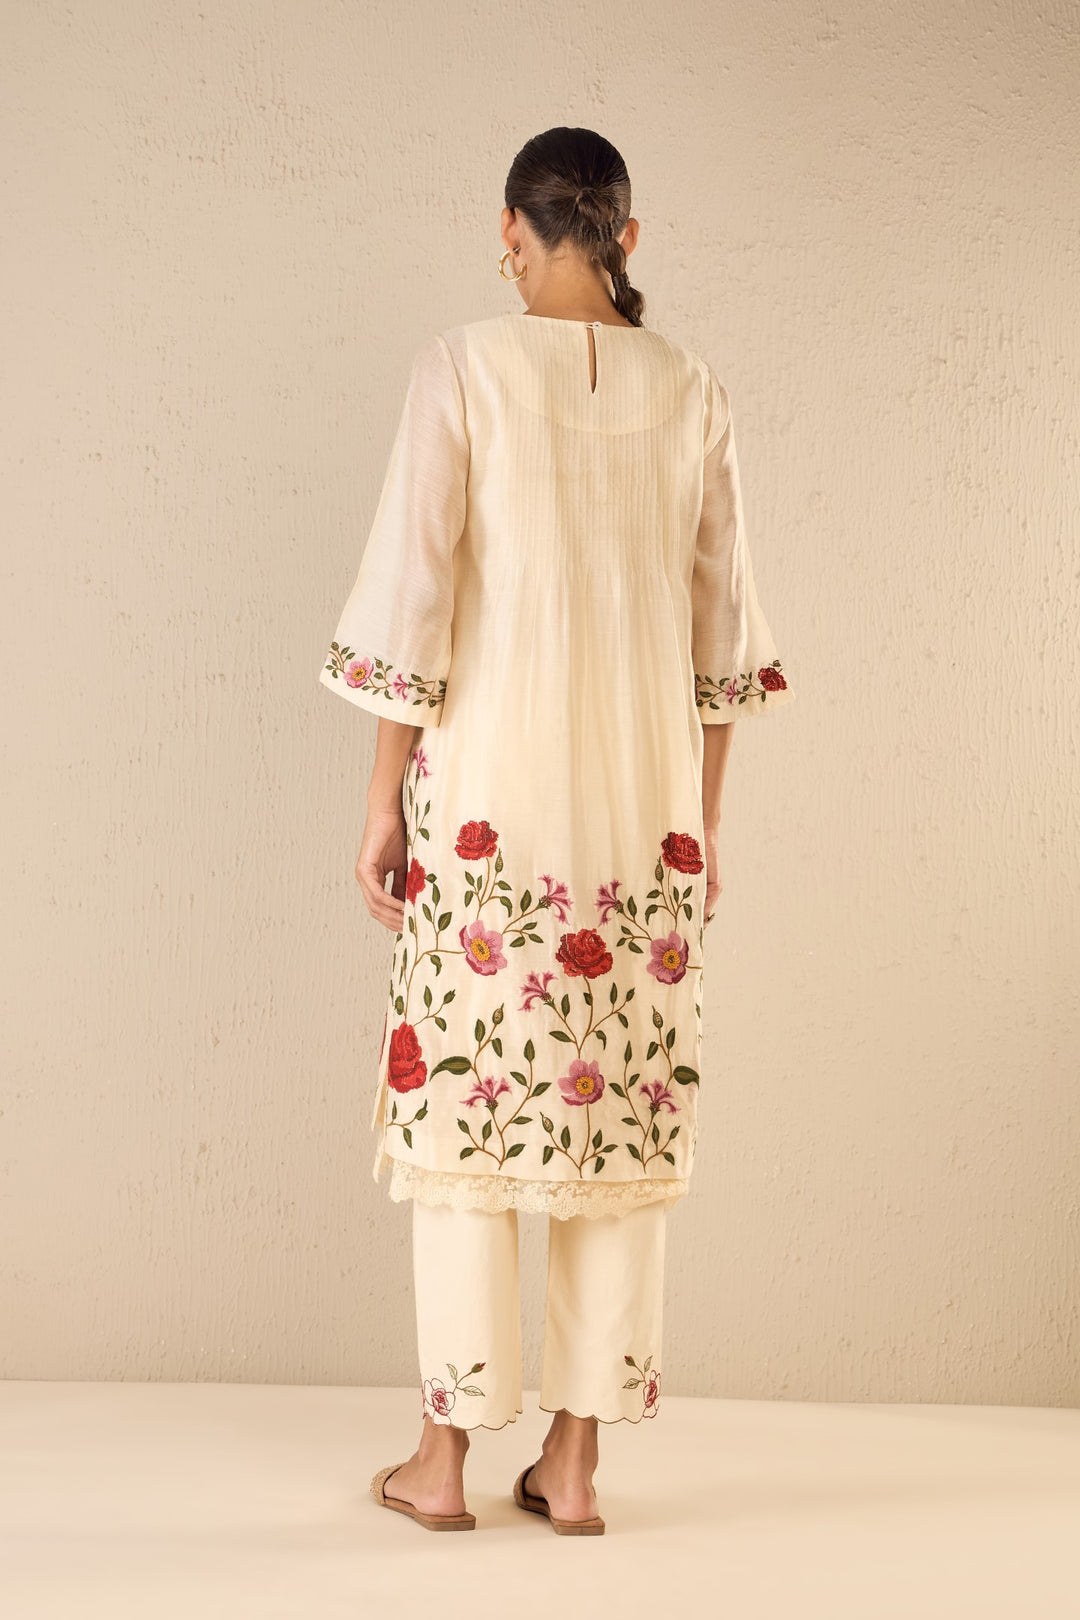 GARDENIA CHARM: IVORY FLORAL EMBRIODERY JAAL KURTA WITH IVORY EMBROIDERY SCALLOPED PANTS & IVORY CHANERI ROSE EMBRIODERY BORDER DUPATTA